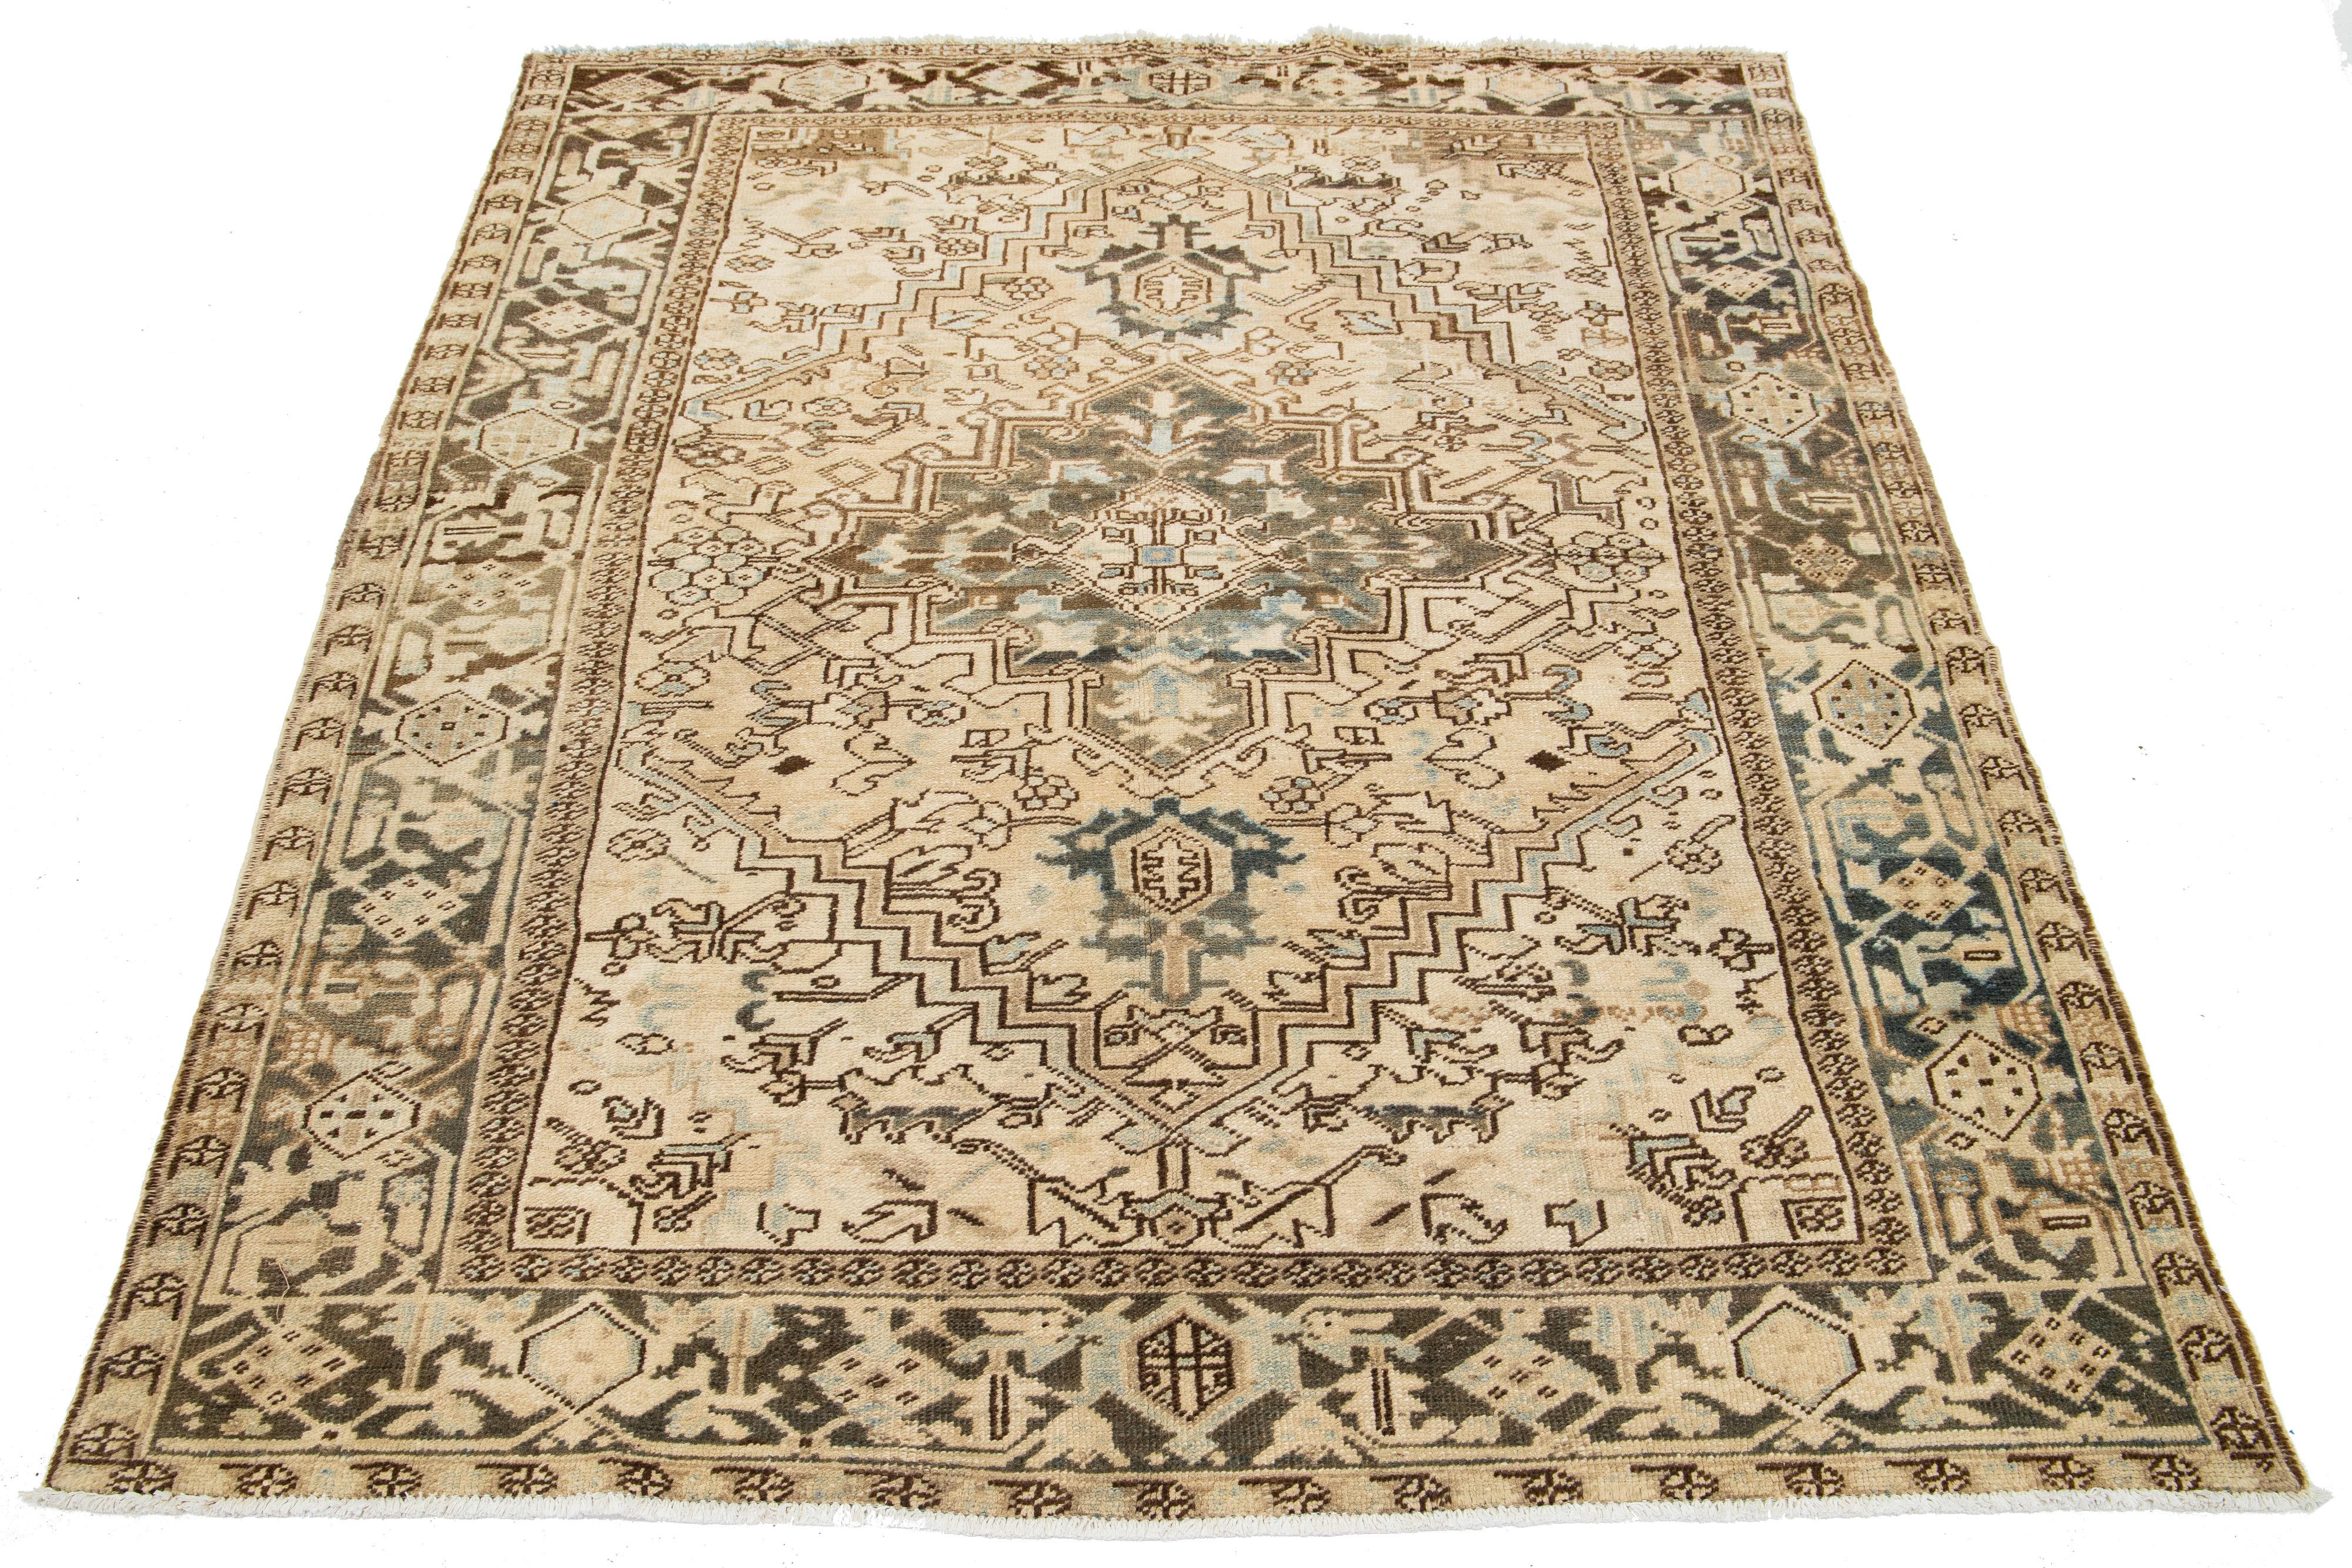 A hand-knotted wool antique Persian Heriz rug with a blue and brown all-over pattern on a beige field.

This rug measures 6'5' x 8'6